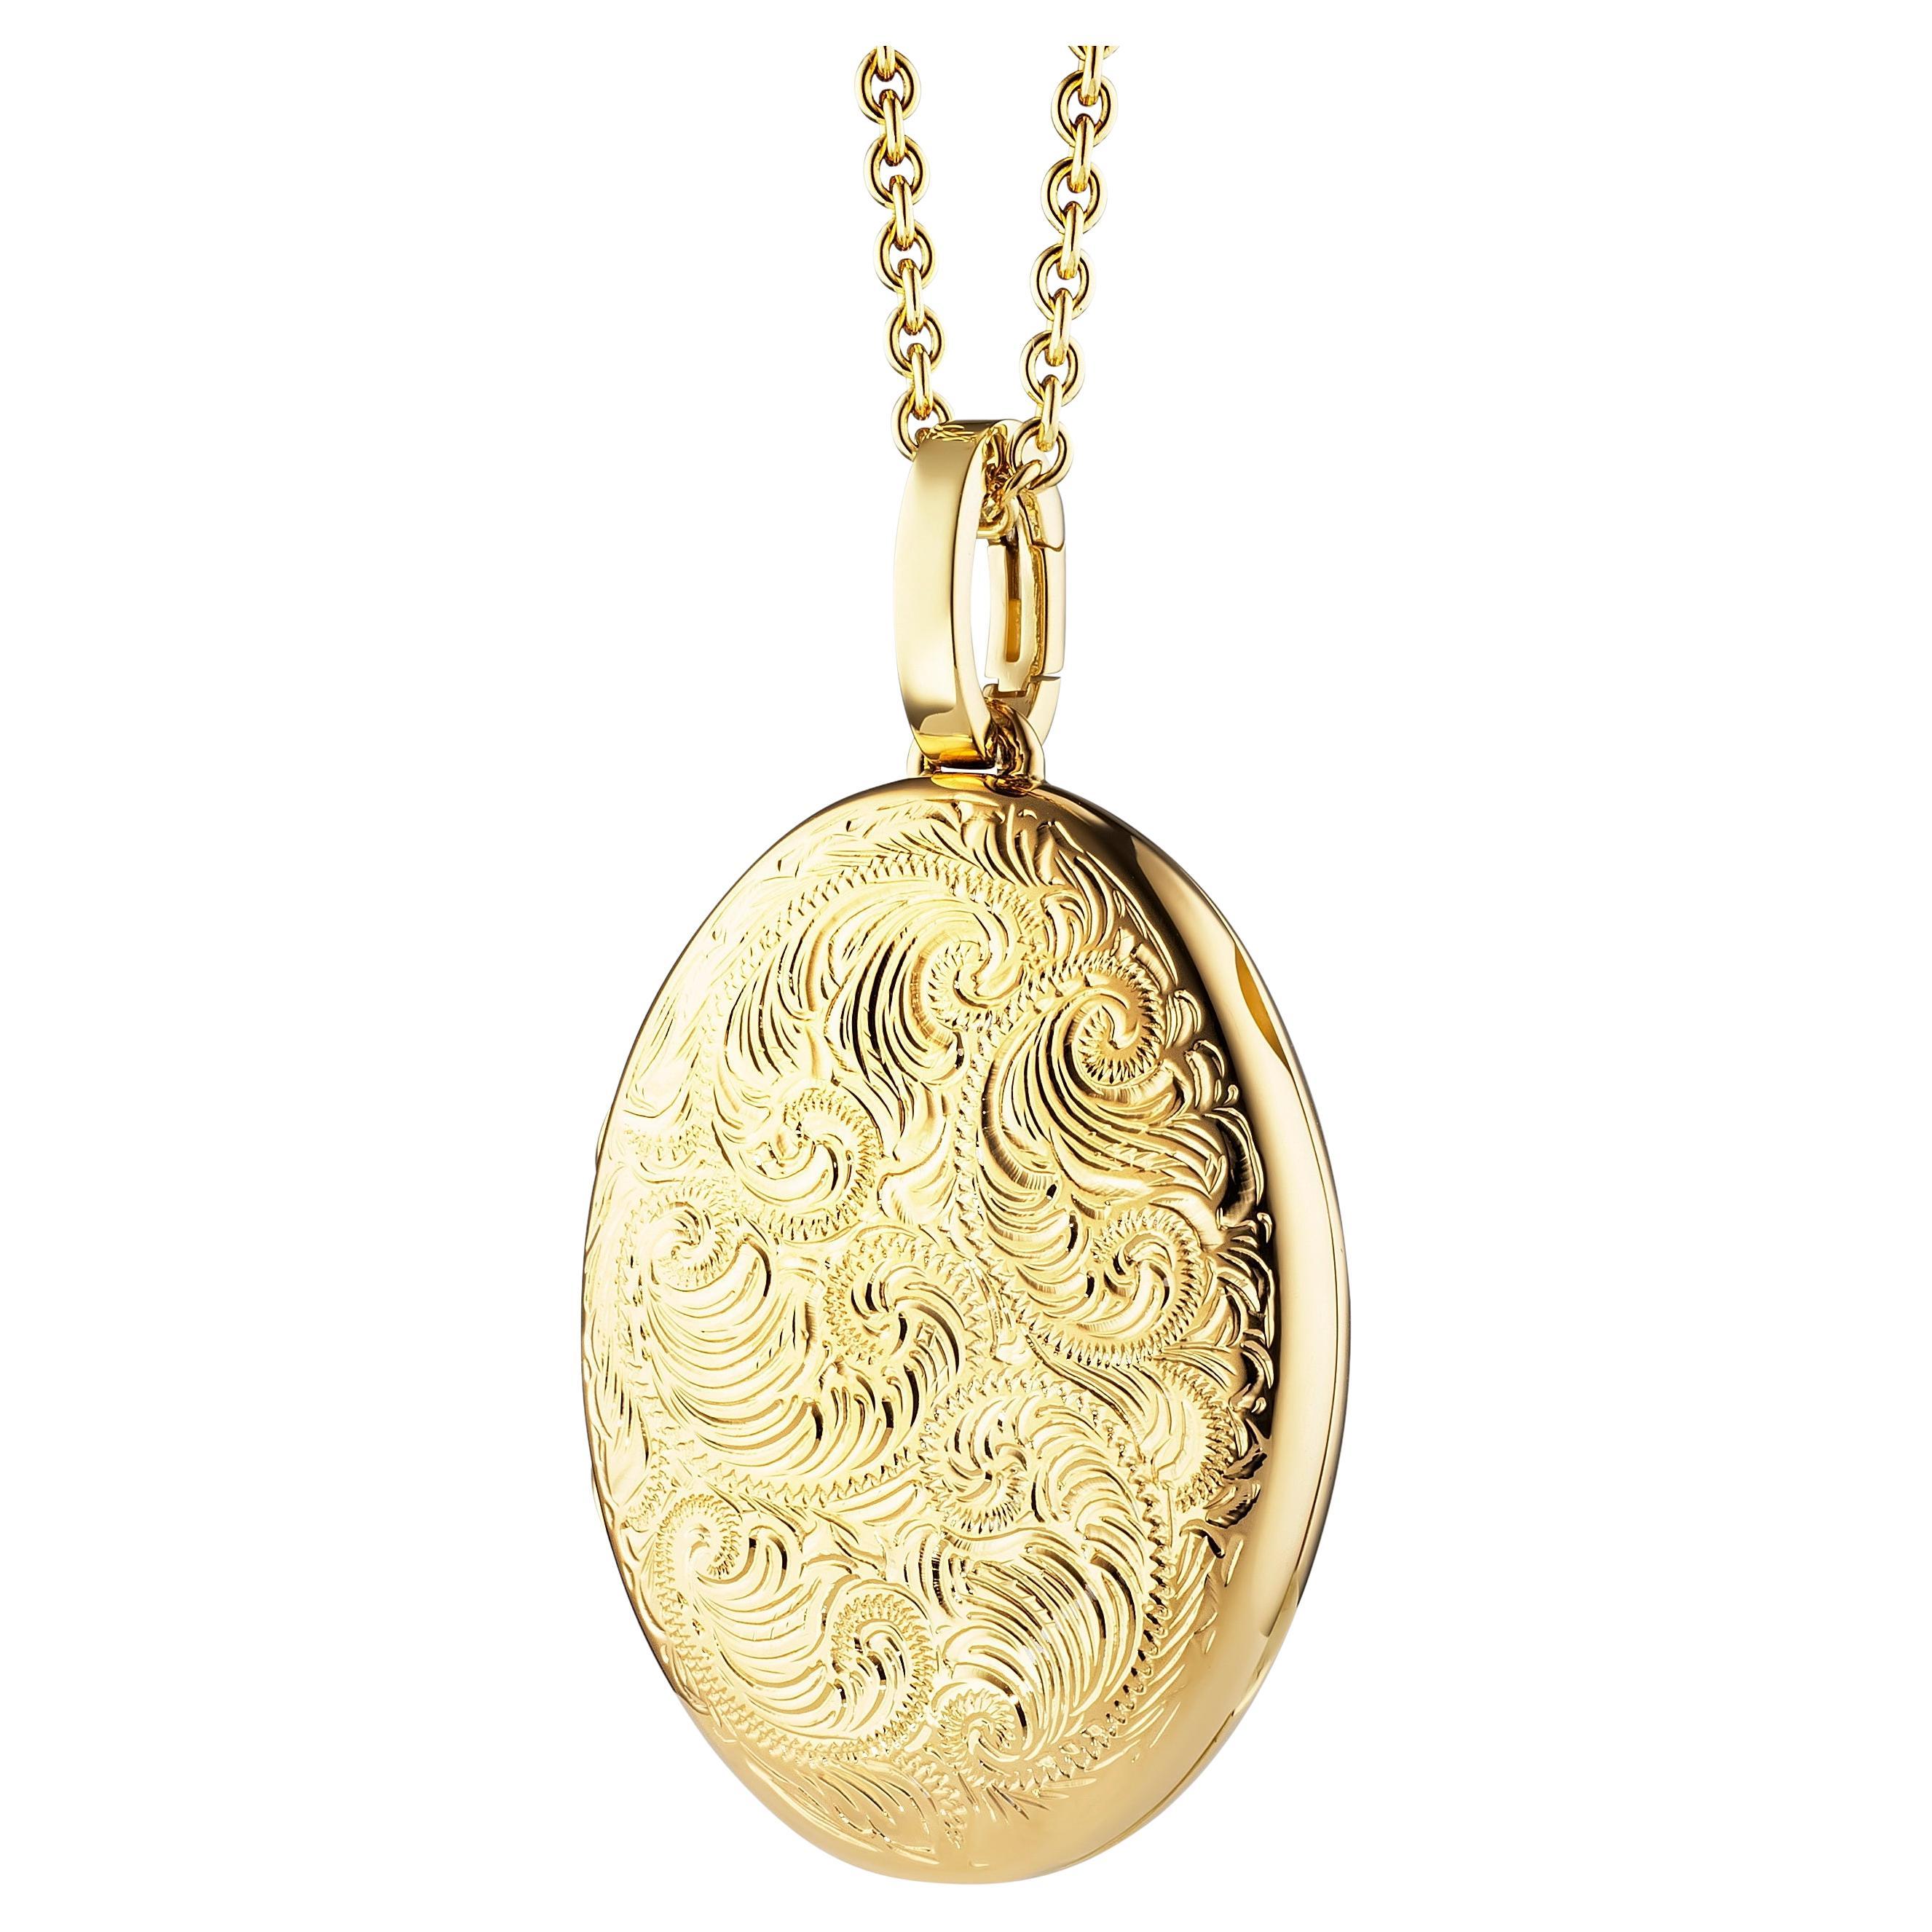 Oval Locket Pendant Necklace Scroll Engraving 18k Yellow Gold 23.0 x 32.0 mm